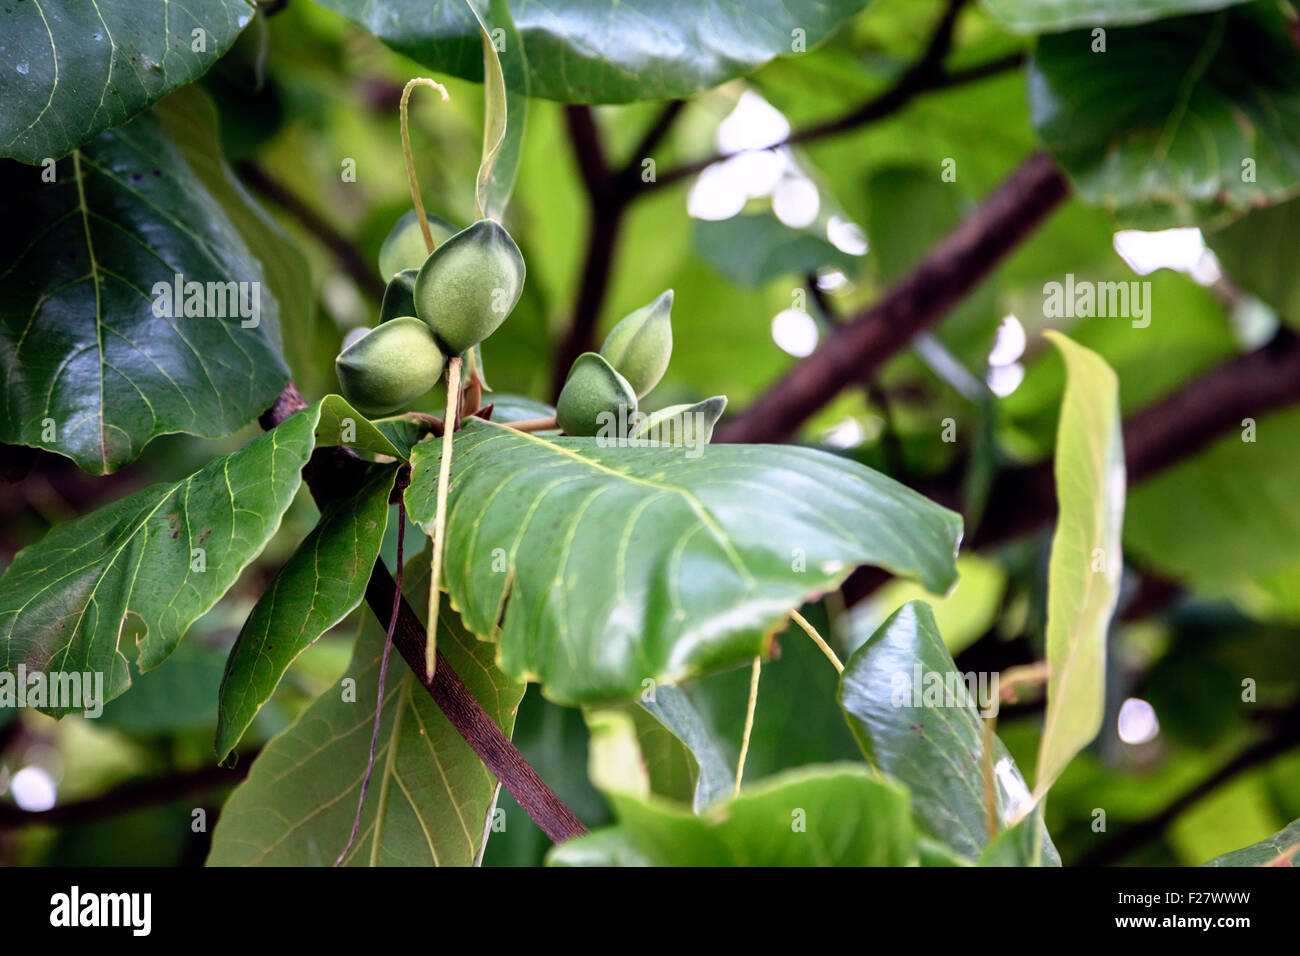 Closeup image of green almonds on a tree brunch Stock Photo